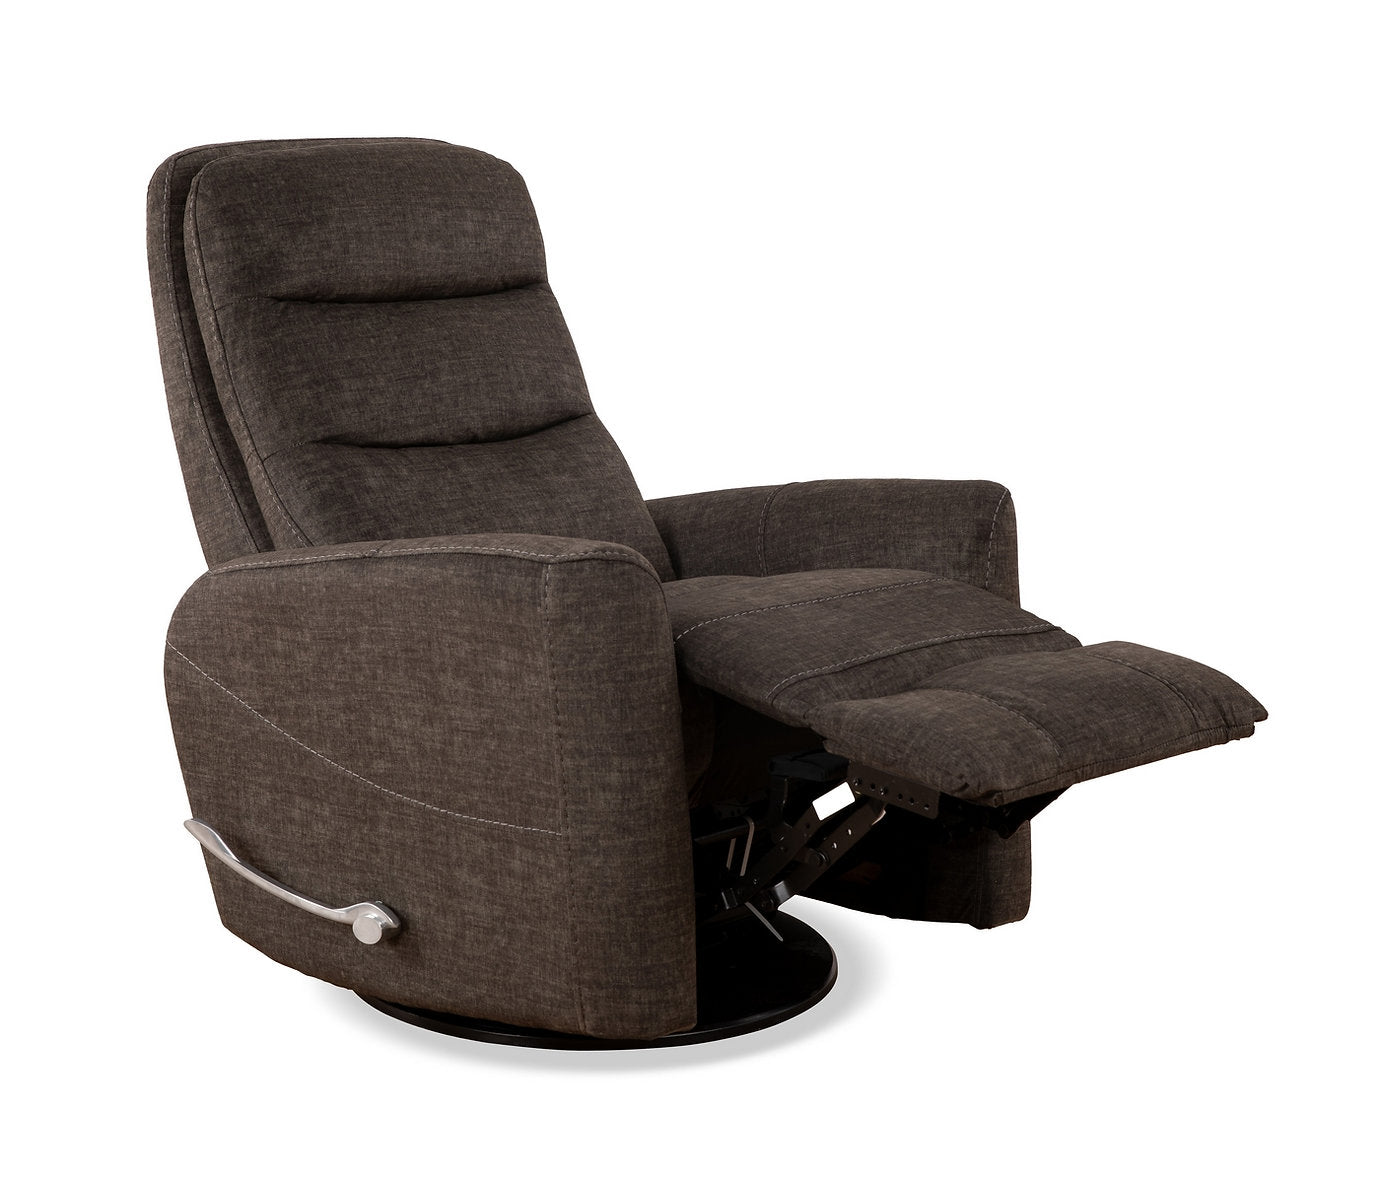 Grenada Fabric Manual Recliner Chair with Solid Hardwood Frame